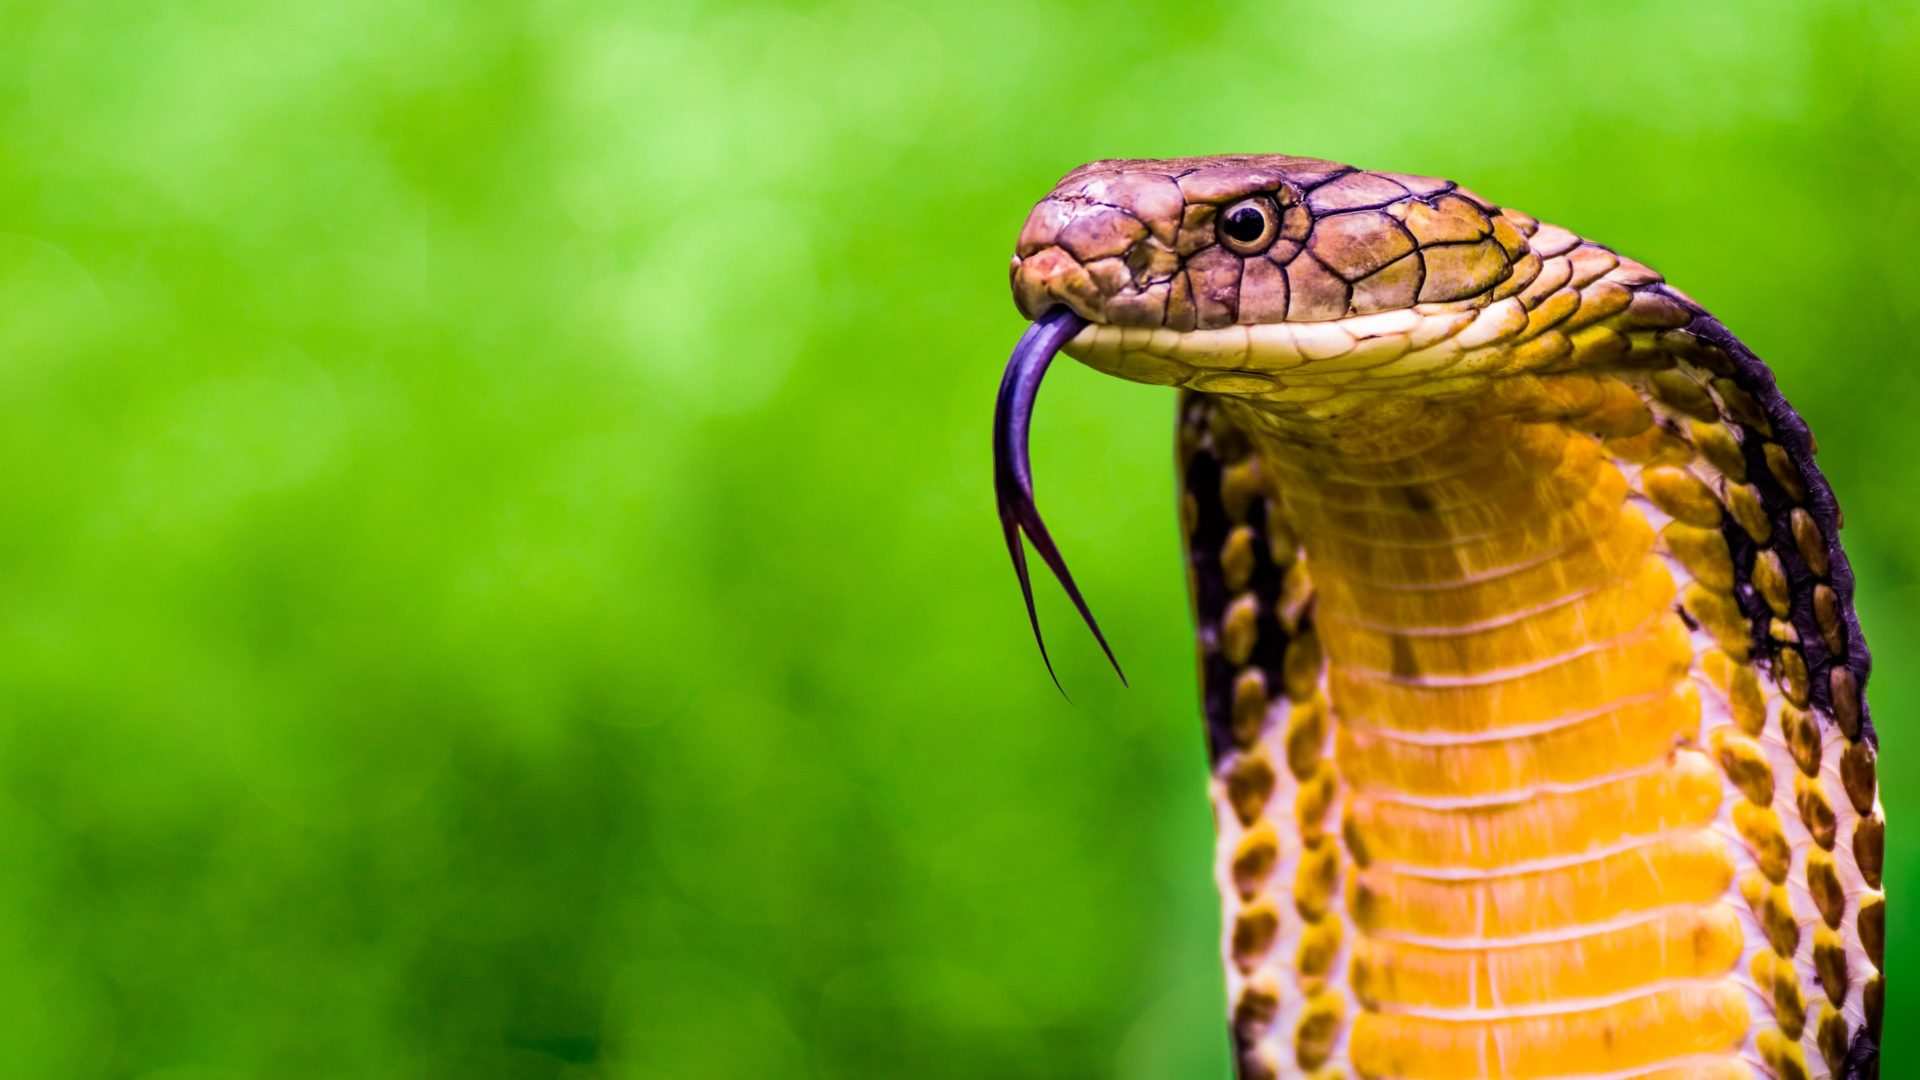 Top 10 Coolest Snakes In The World | World's Top Insider